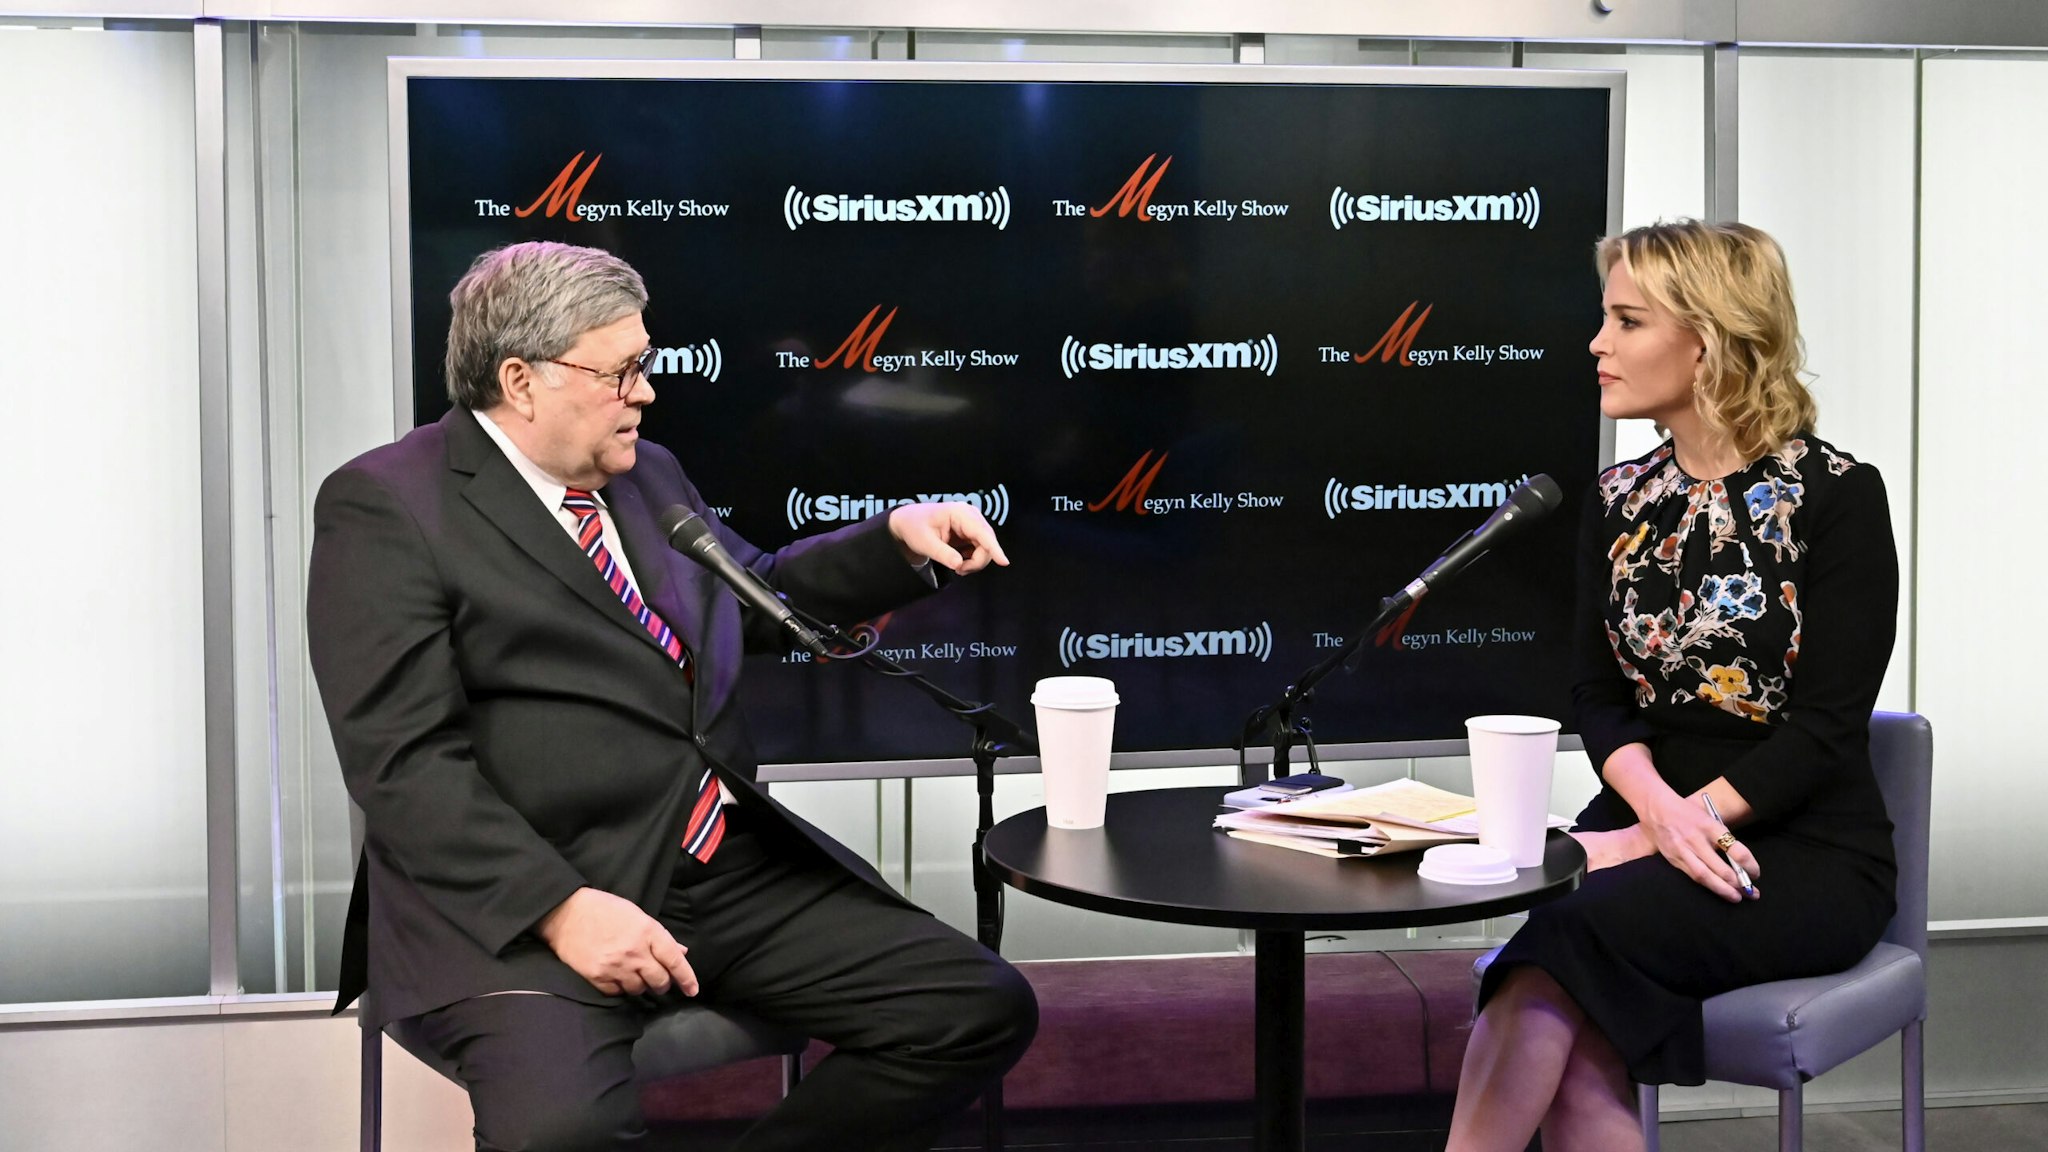 NEW YORK, NEW YORK - MAY 03: SiriusXM's Megyn Kelly talks with former Attorney General Bill Barr during a taping of The Megyn Kelly Show at SiriusXM studios on May 03, 2022 in New York City.